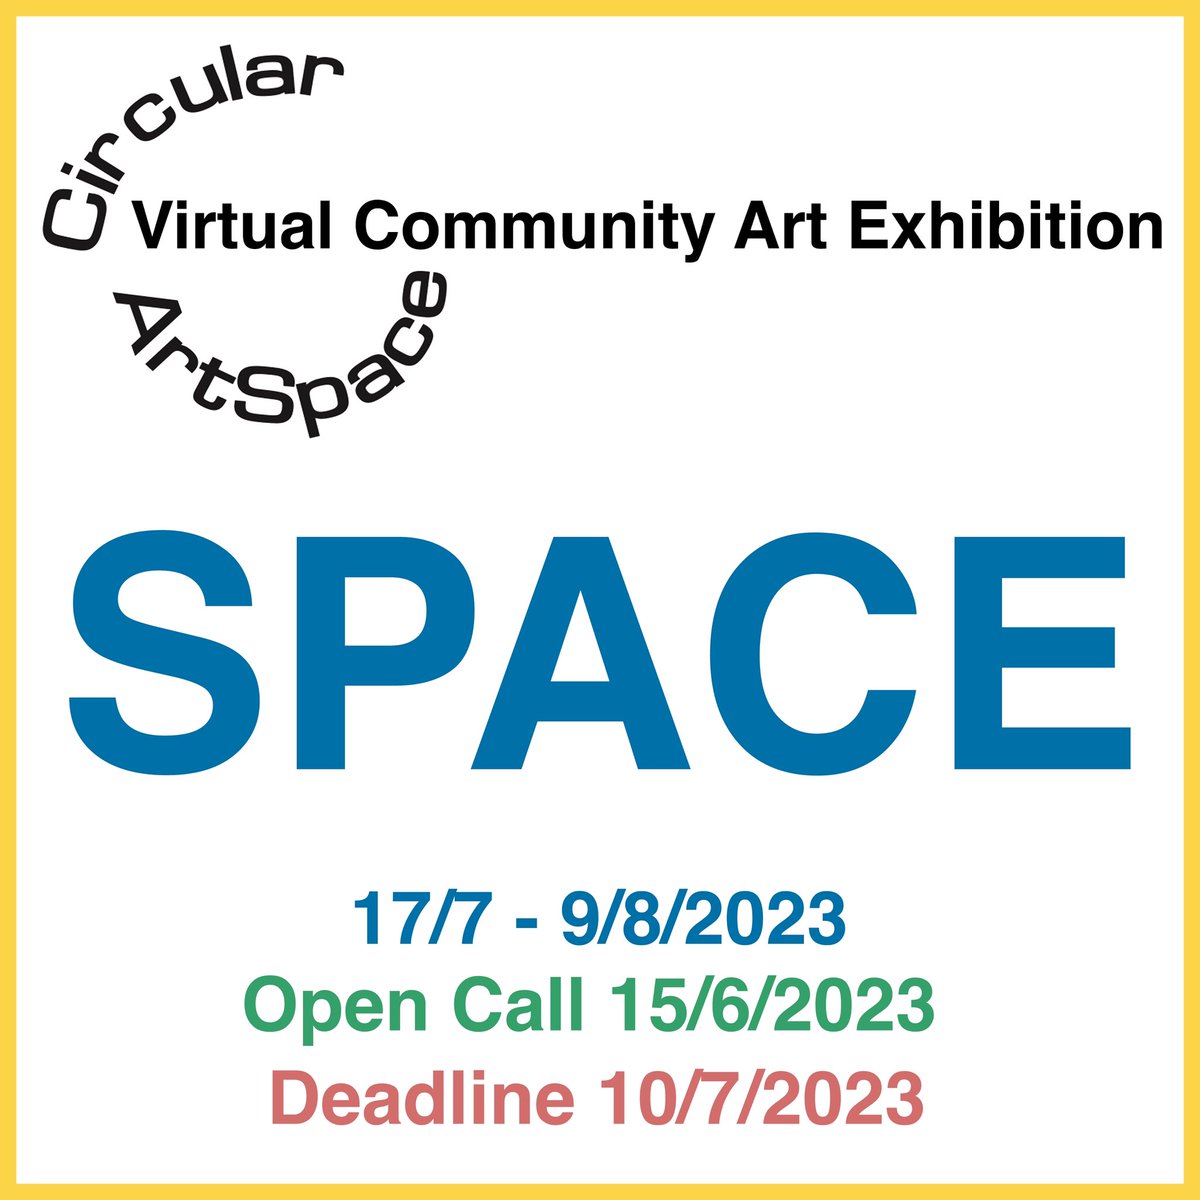 6 days left to enter. Open call for artists for the 8th Community #ArtExhibition in #VirtualReality
SPACE
17/7-9/8
Apply today on our website.
circularartspace.co.uk/submission
Deadline the 10th of July

#opencallforartists #onlineexhibition #contemporaryartexhibition #contamporaryartists